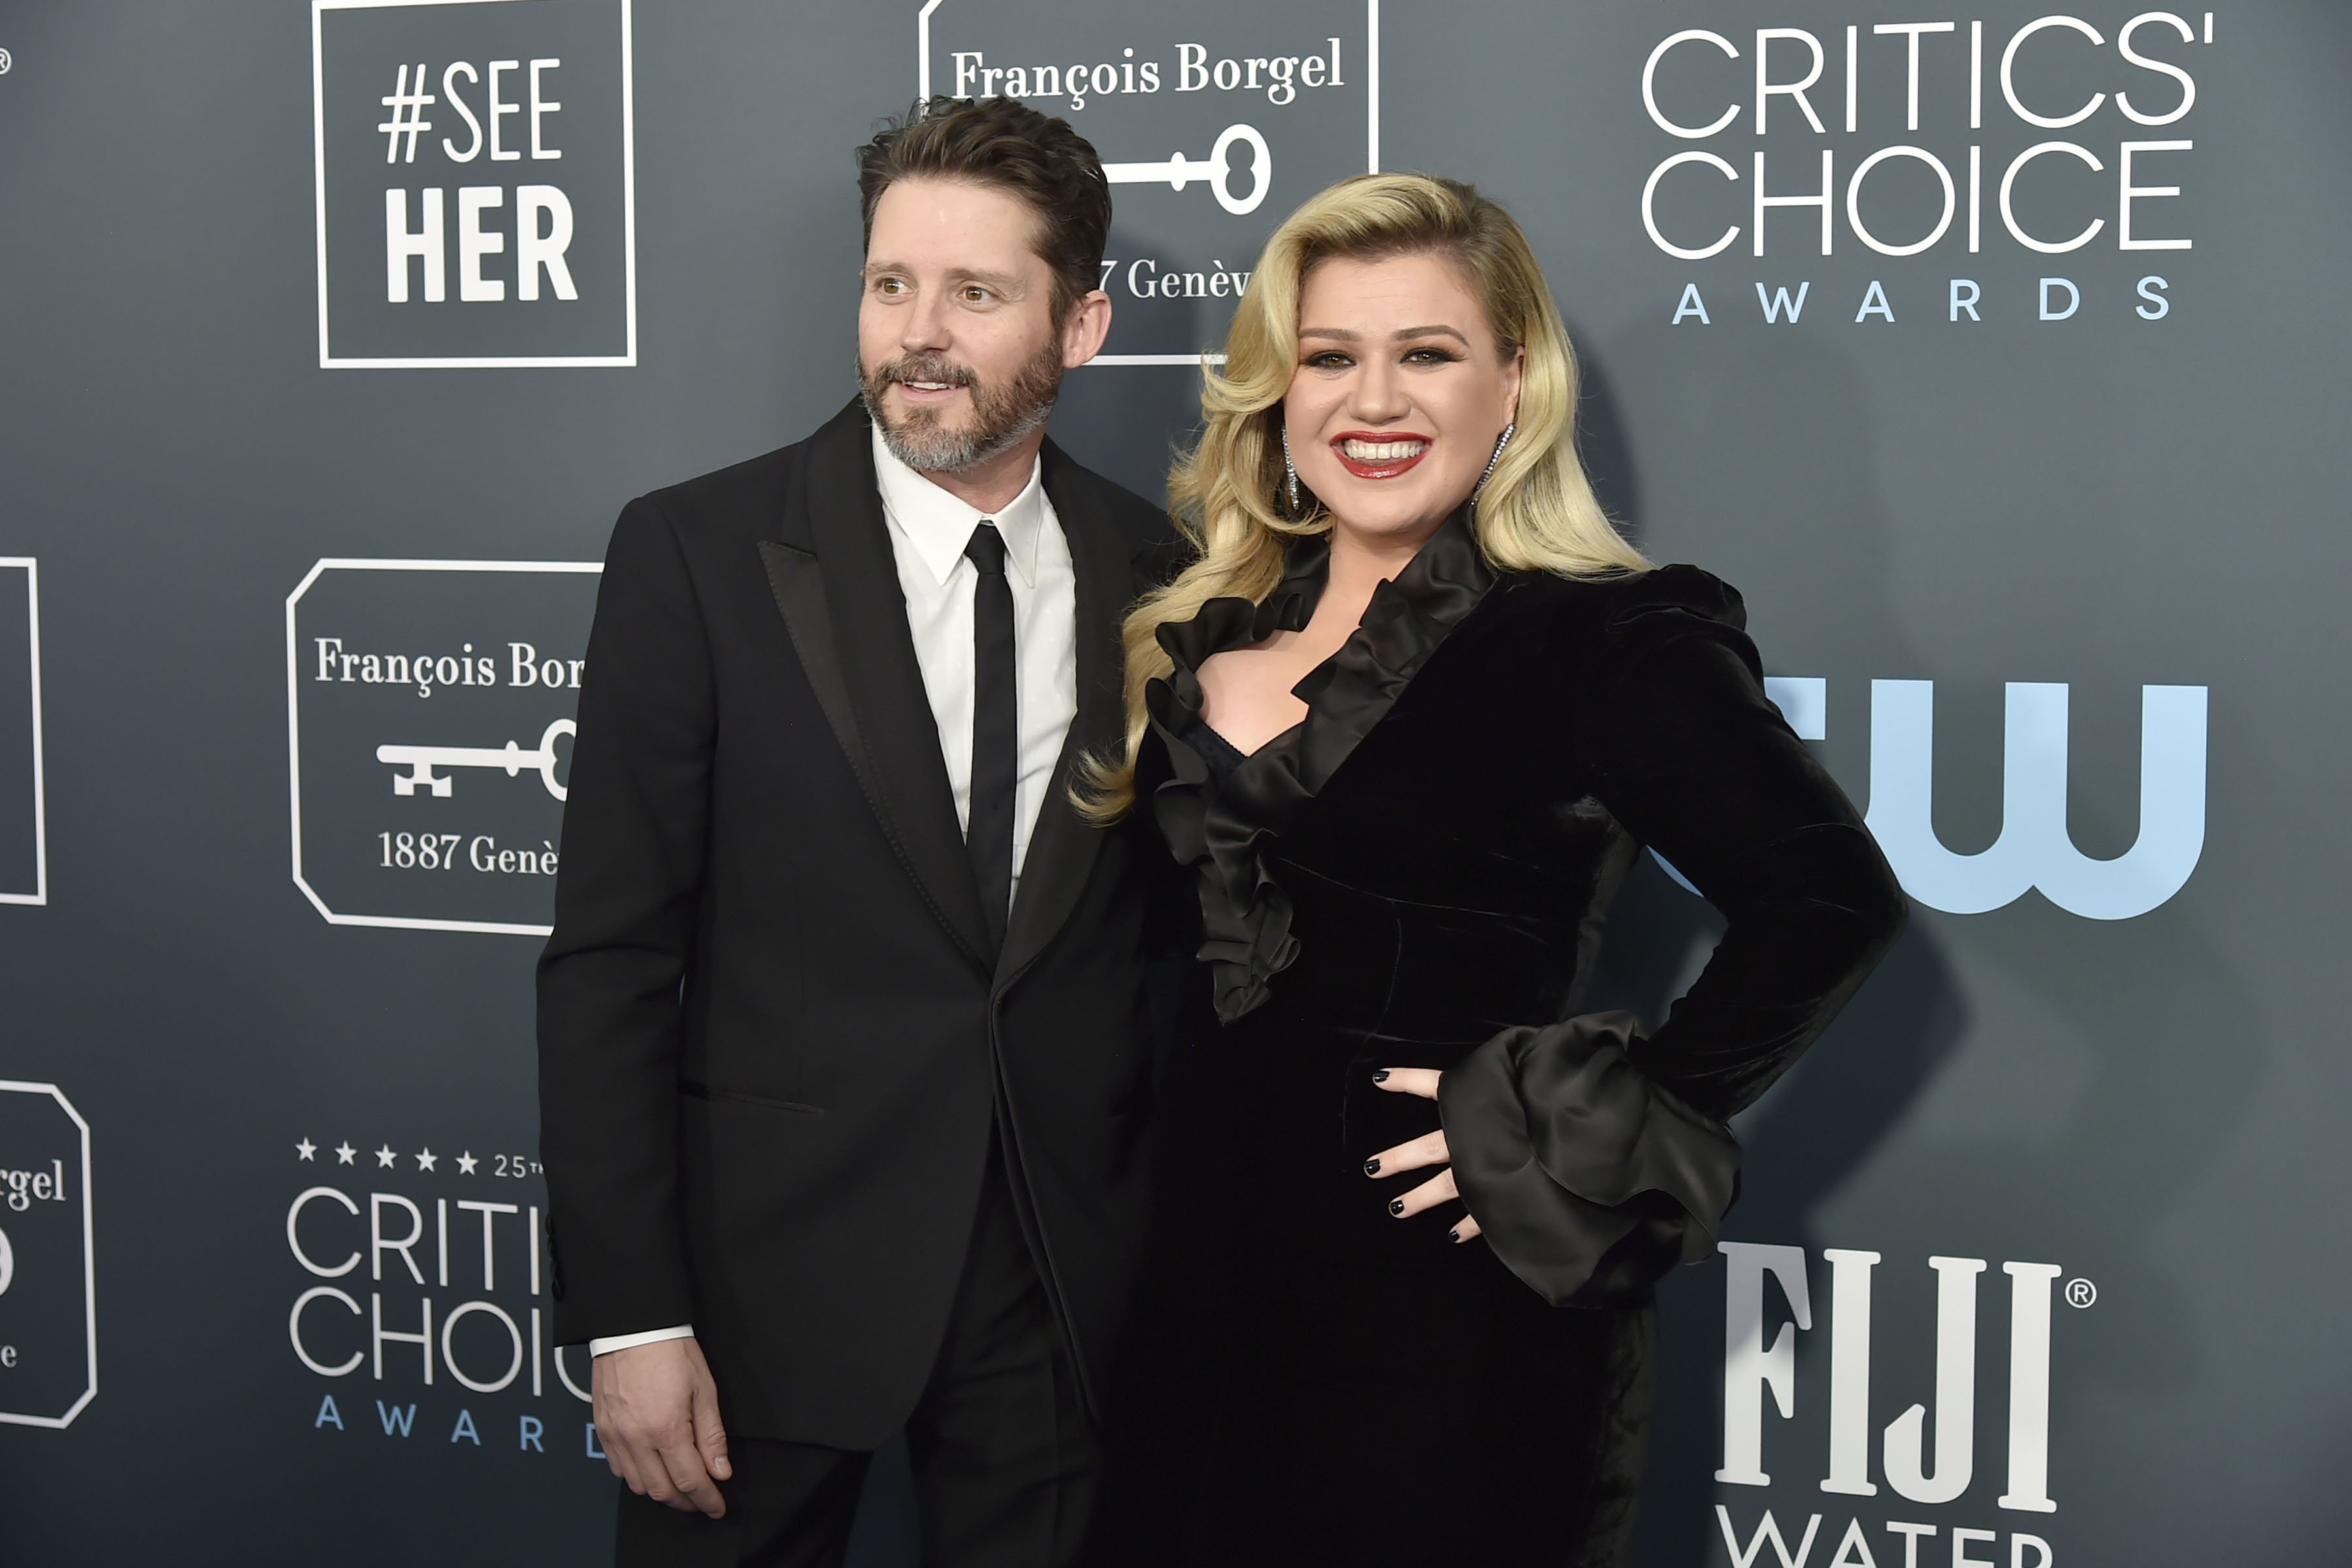 Brandon Blackstock and Kelly Clarkson during the arrivals for the 25th Annual Critics' Choice Awards at Barker Hangar on January 12, 2020 | Photo: Getty Images